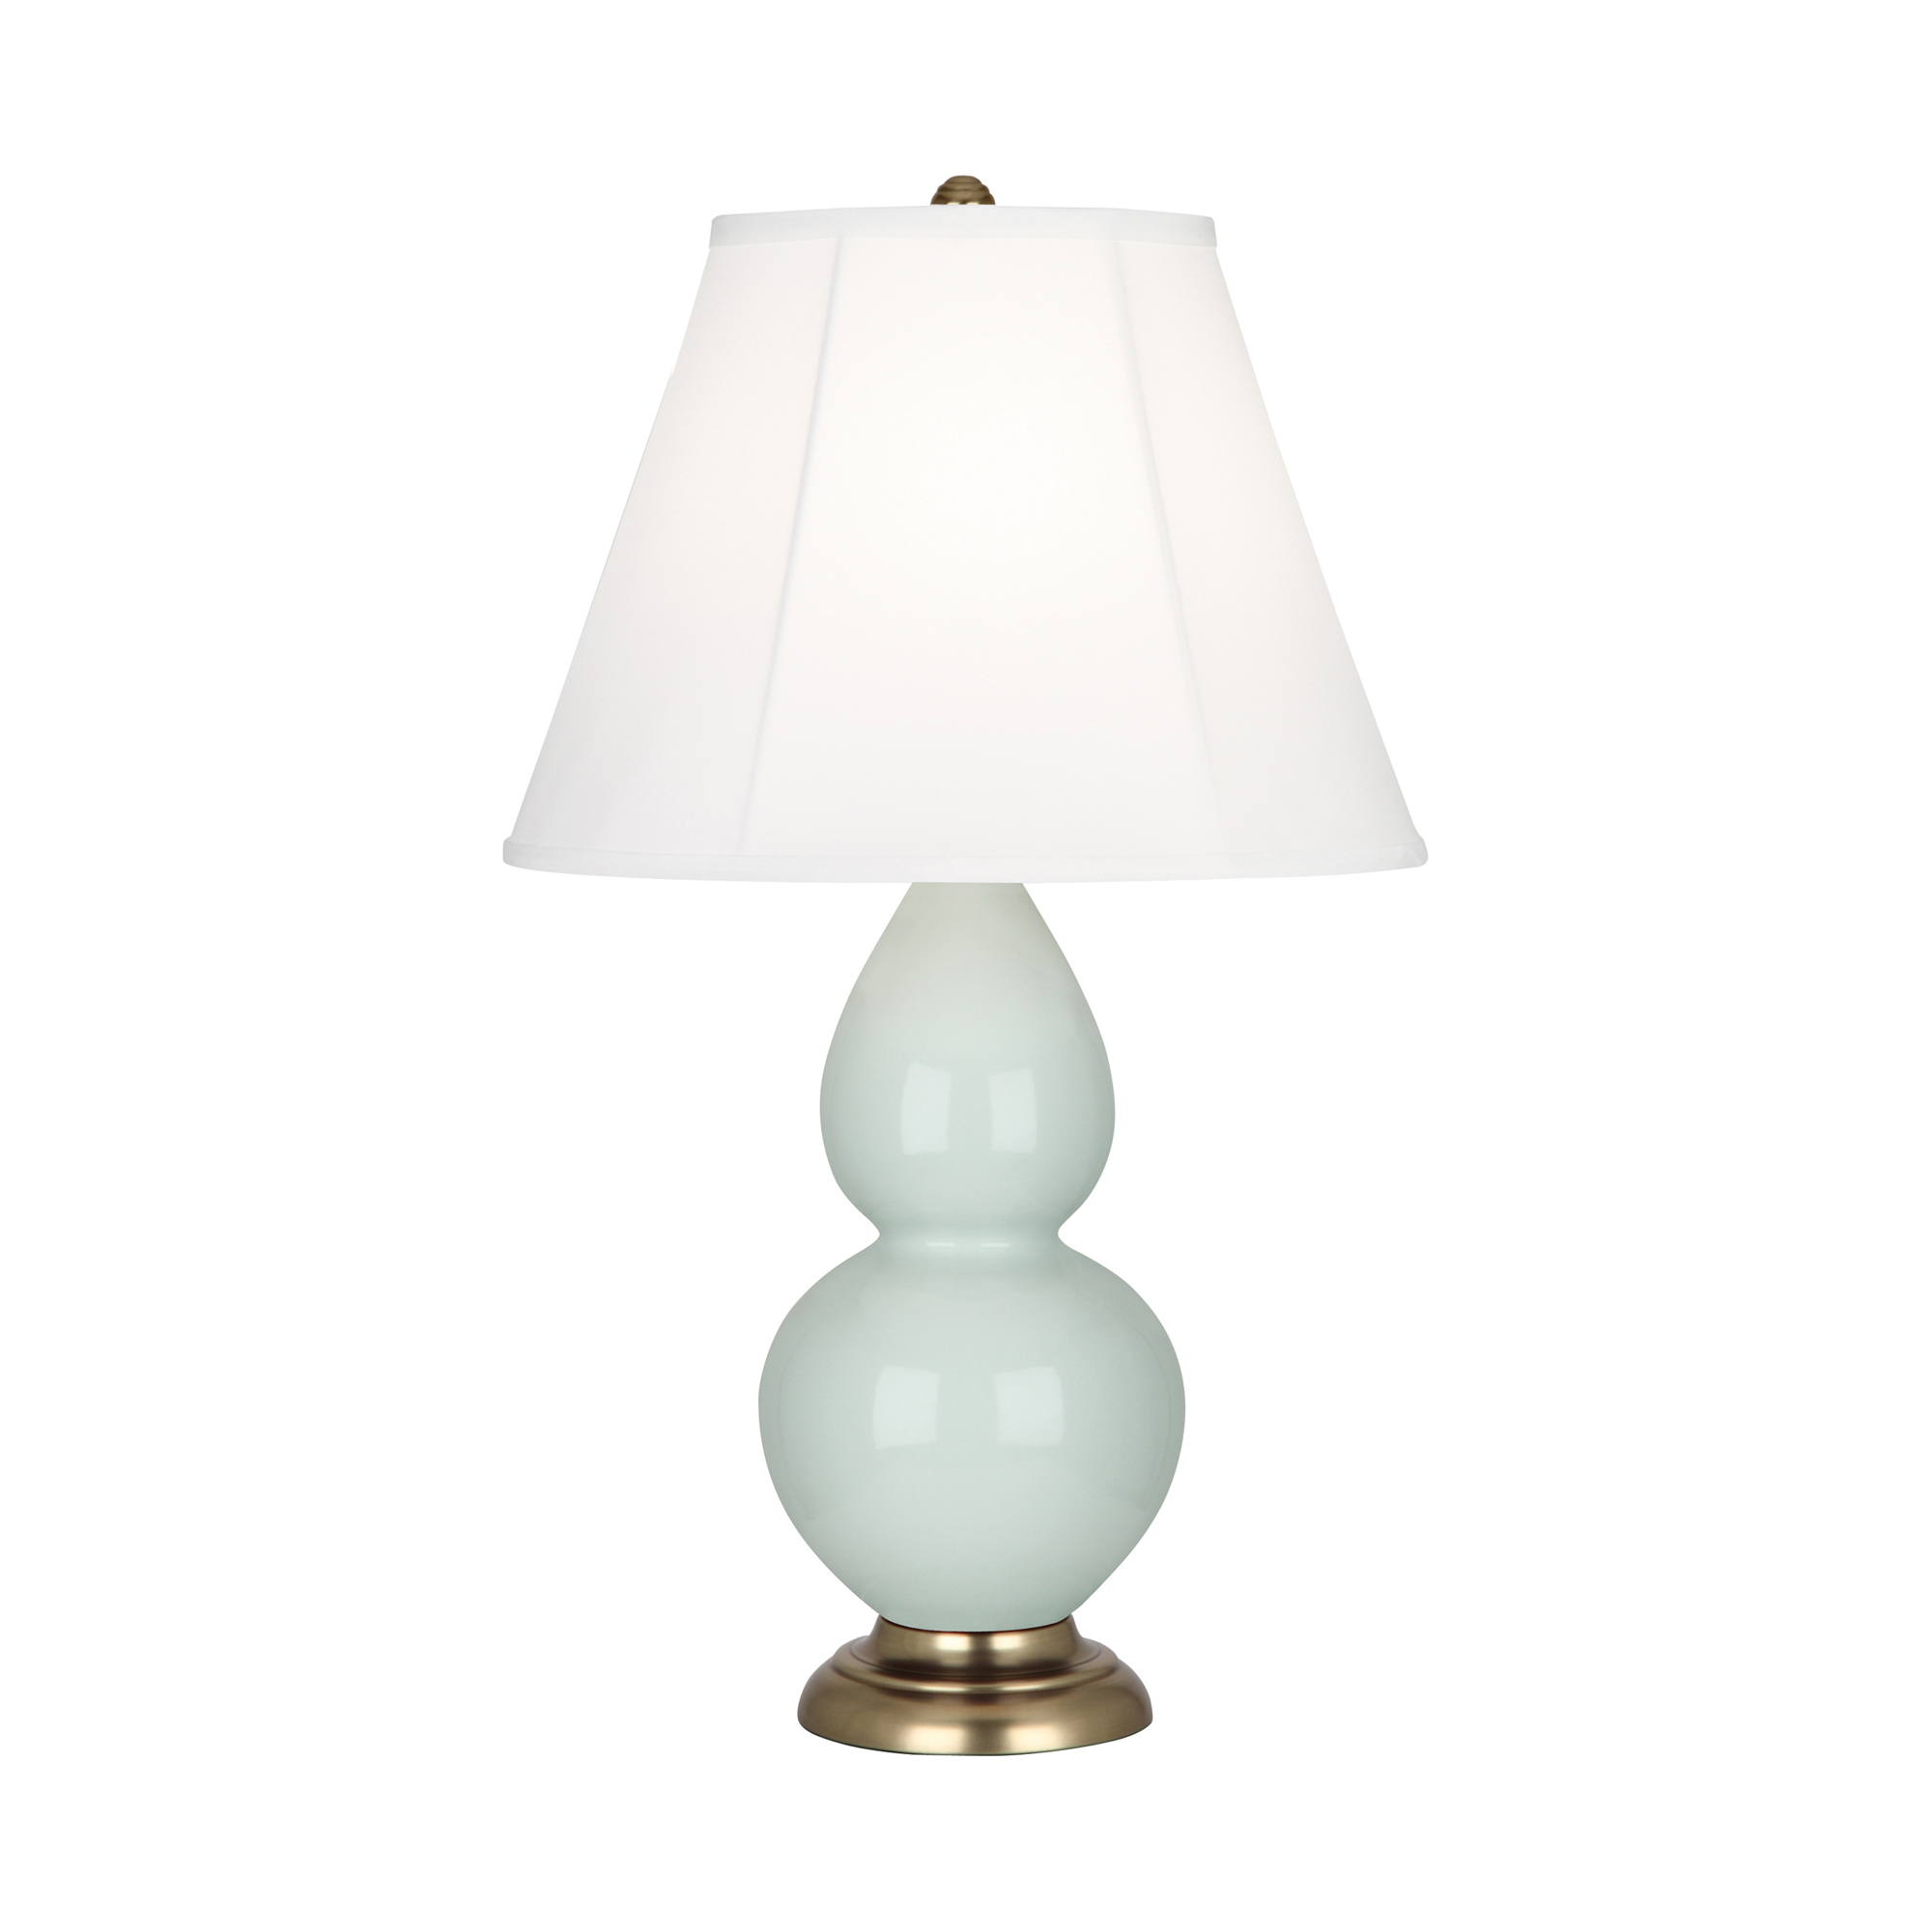 Small Double Gourd Accent Lamp Style #1786